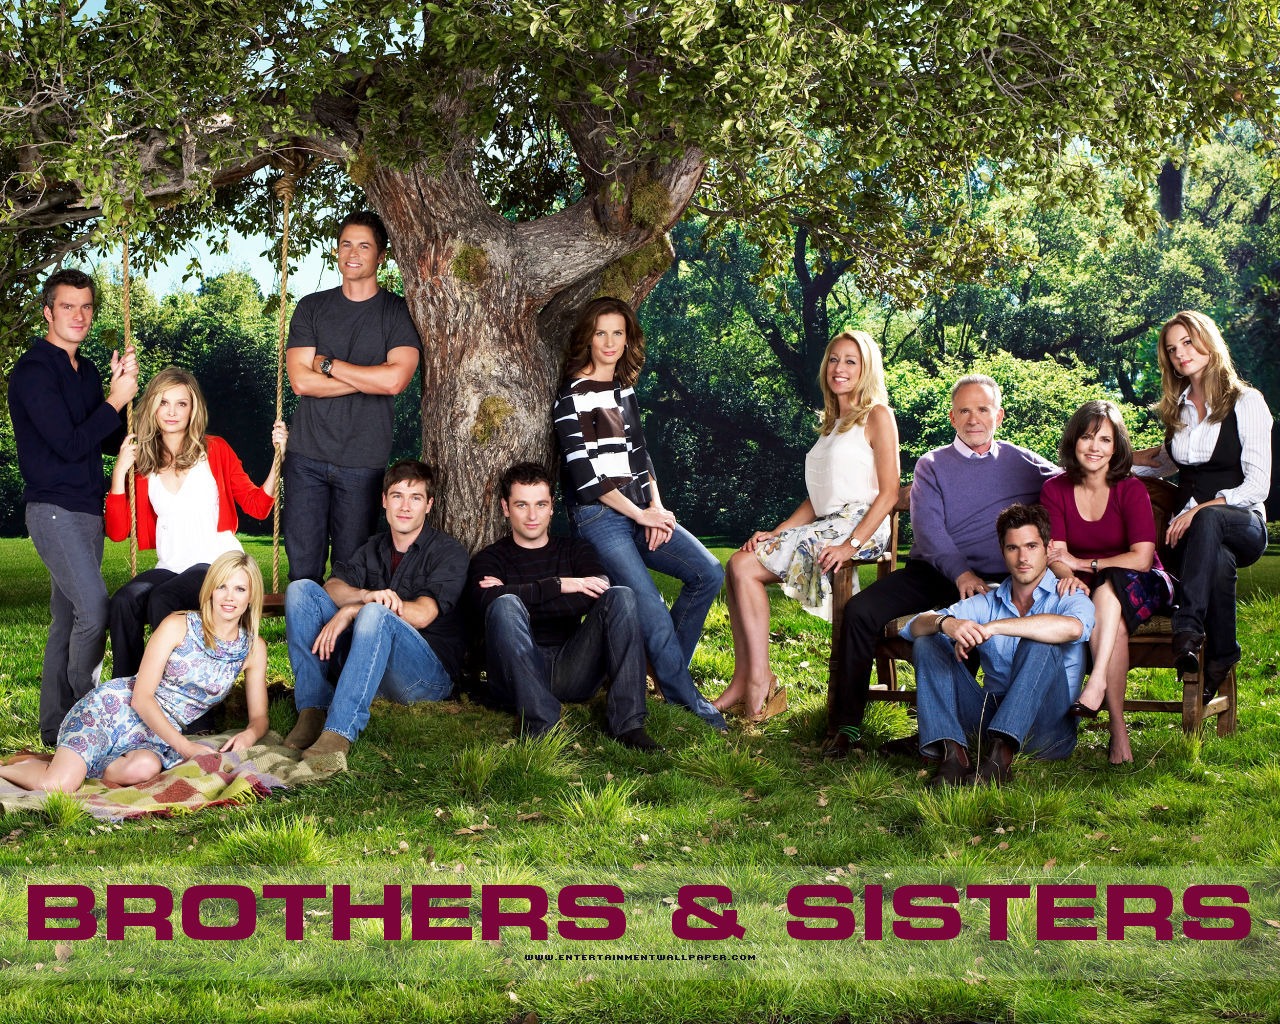 Brothers & Sisters wallpaper #9 - 1280x1024